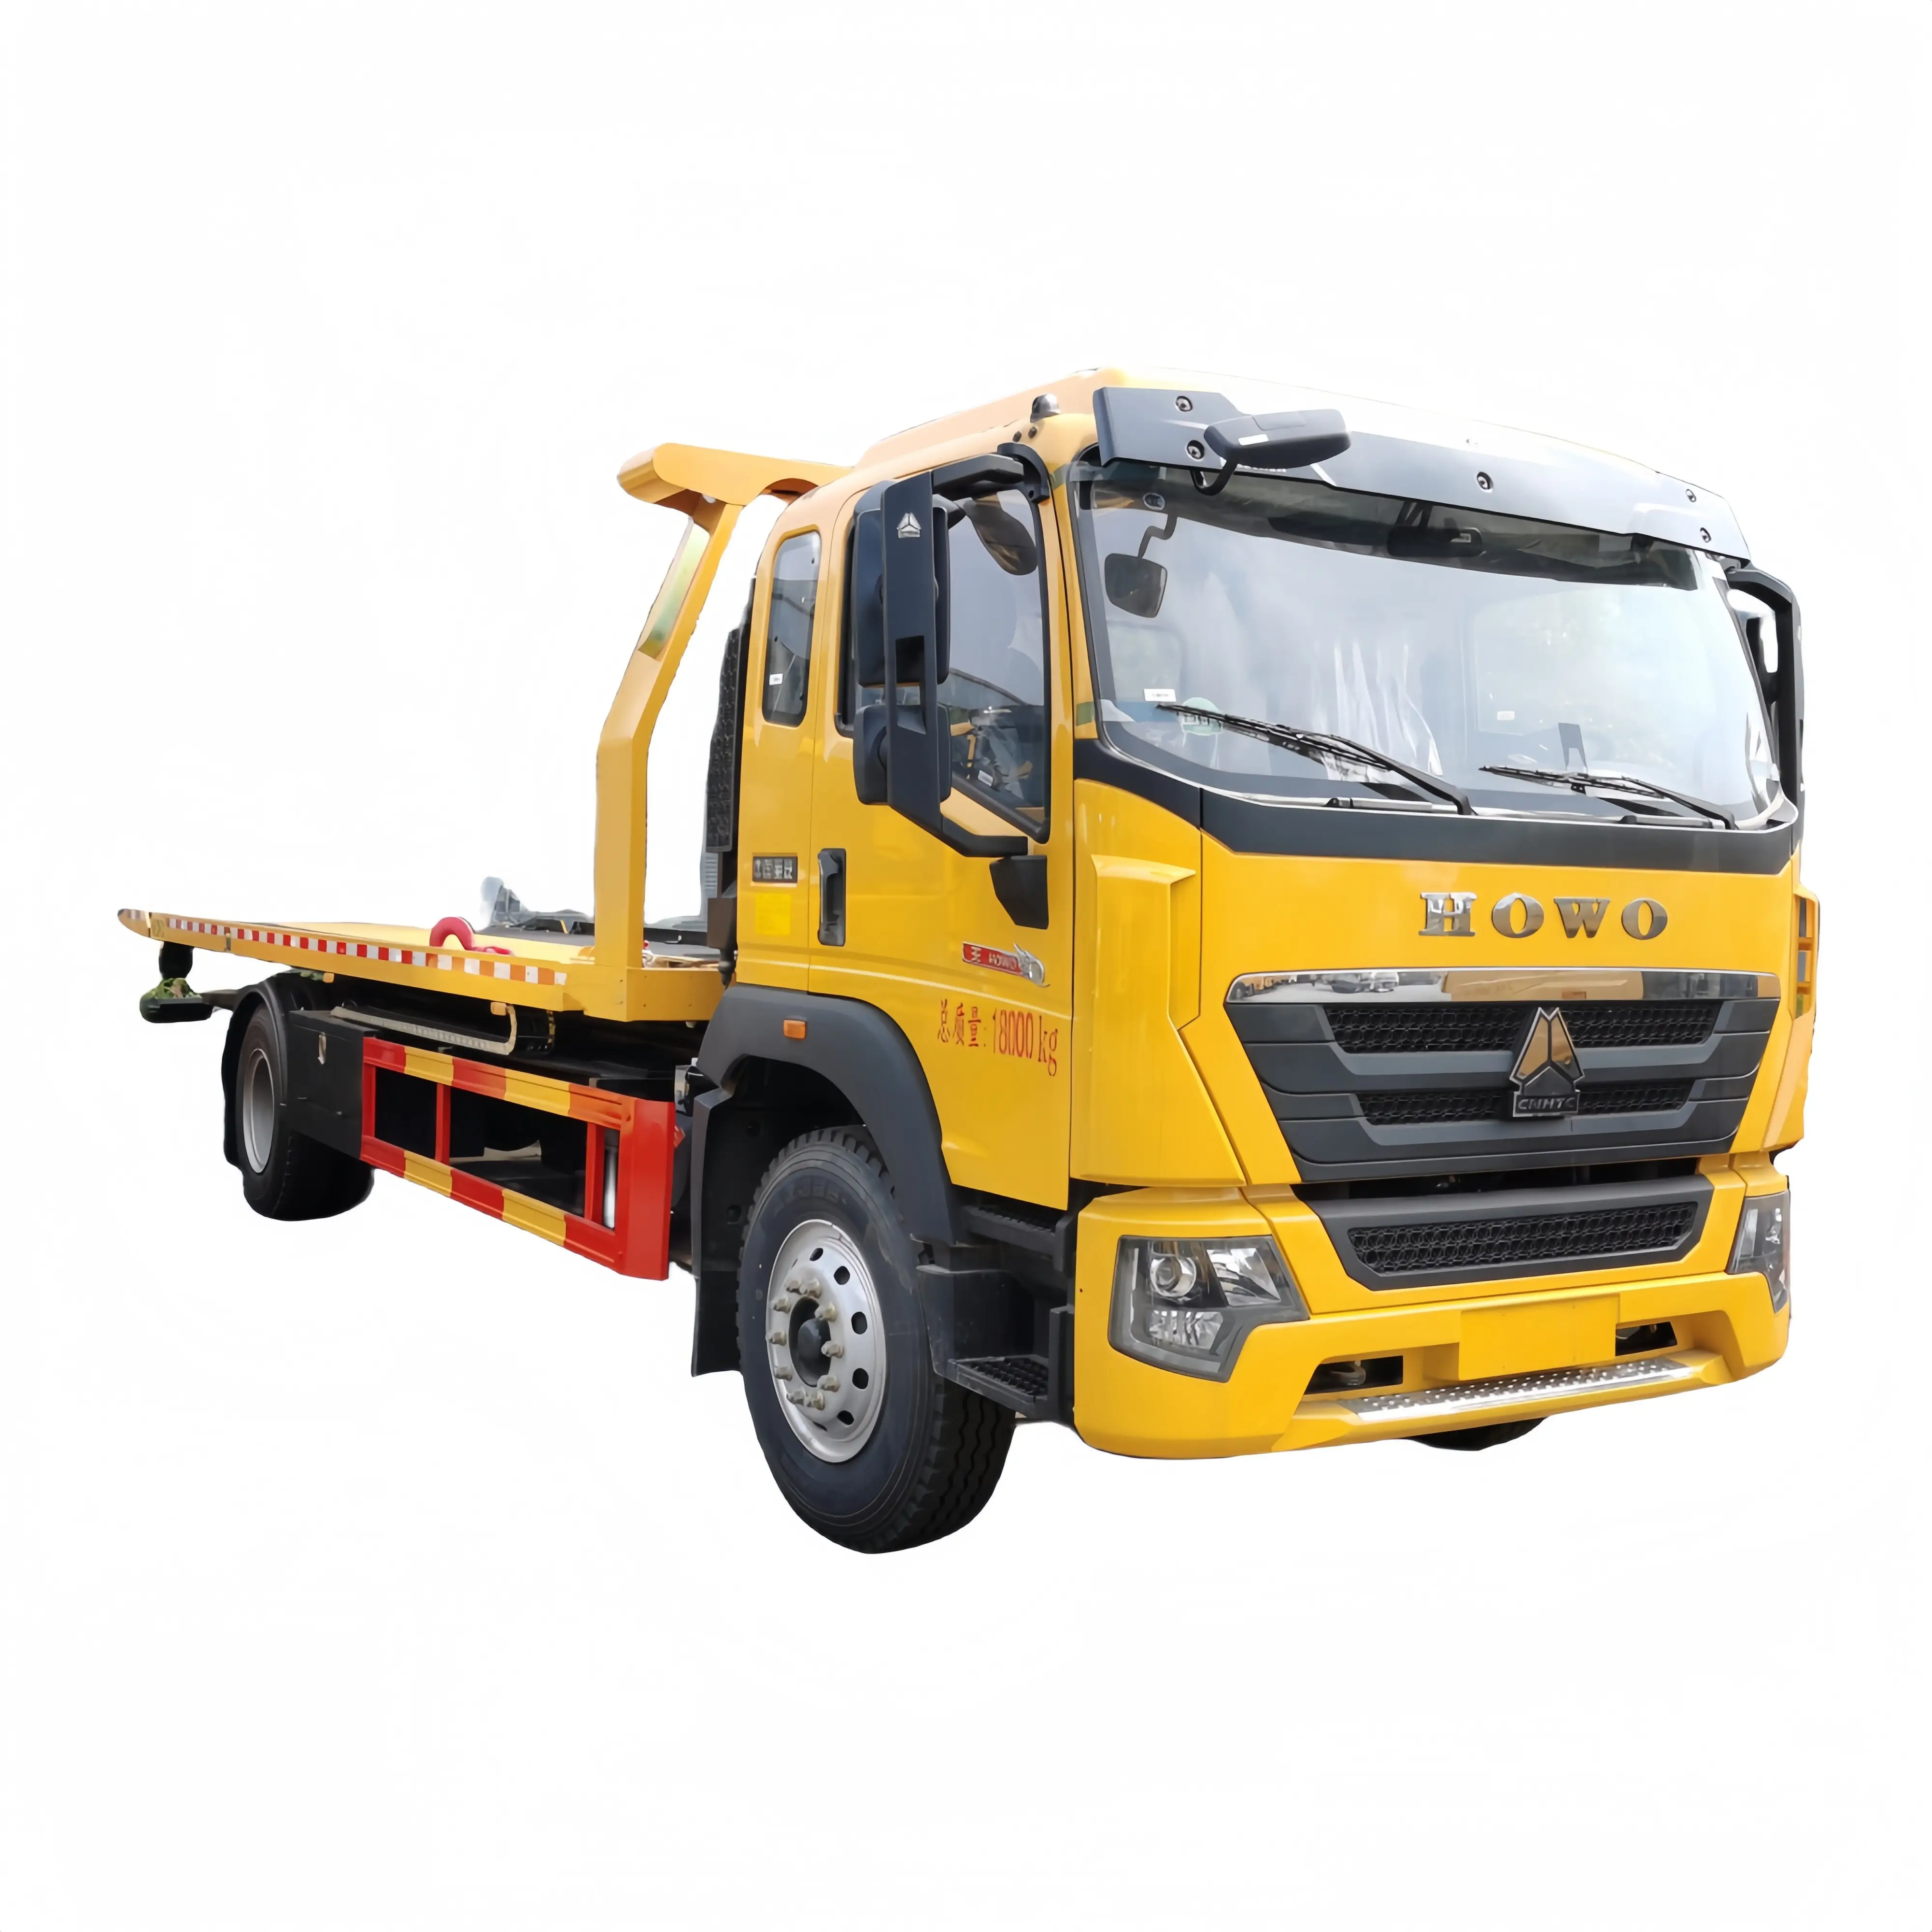 Howo good quality light duty Flatbed full down road emergency Recovery Tow Truck Wrecker Vehicle For hot Sale